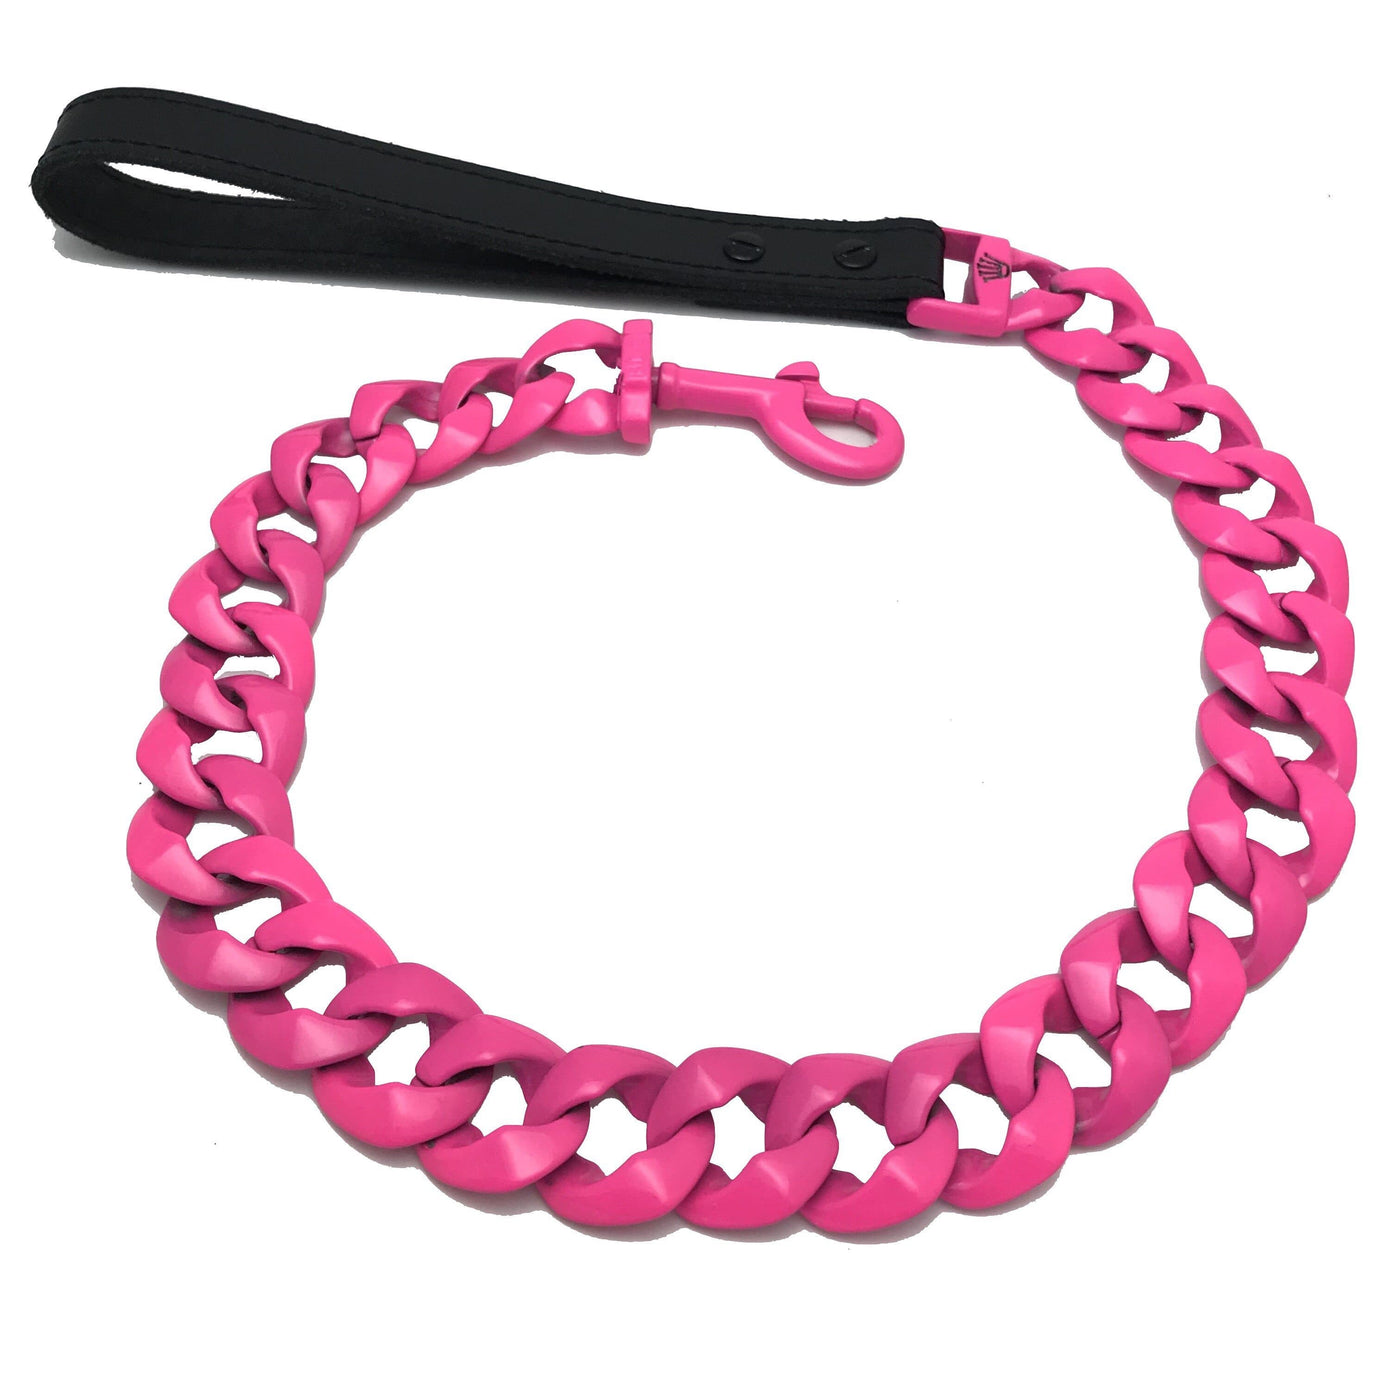 NEON pink dog leash for large and strong dogs | Big Dog Chains